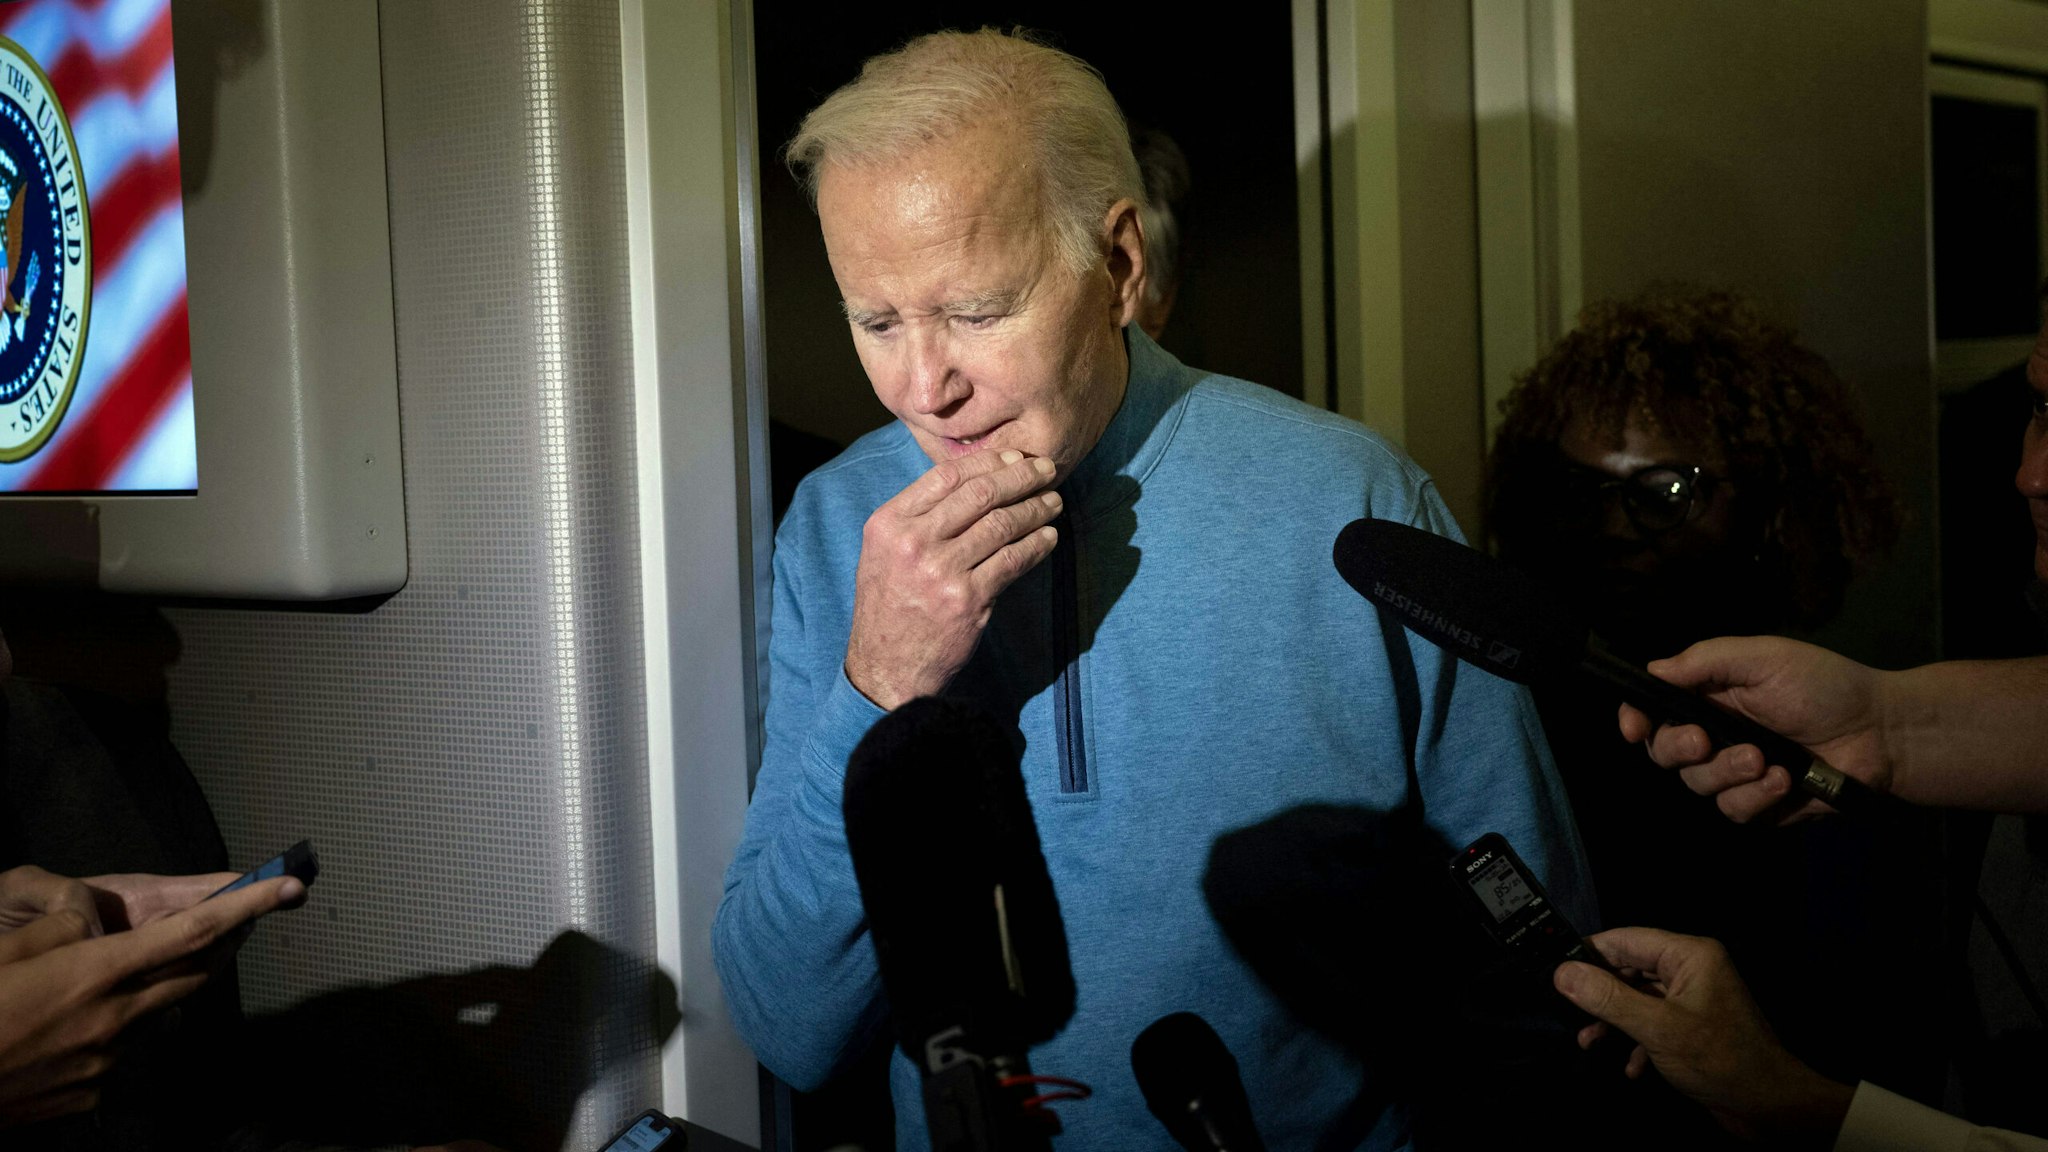 US President Joe Biden speaks to the press aboard Air Force One during a refueling stop at Ramstein Air Base on October 18, 2023 as he returns from a visit to Israel.